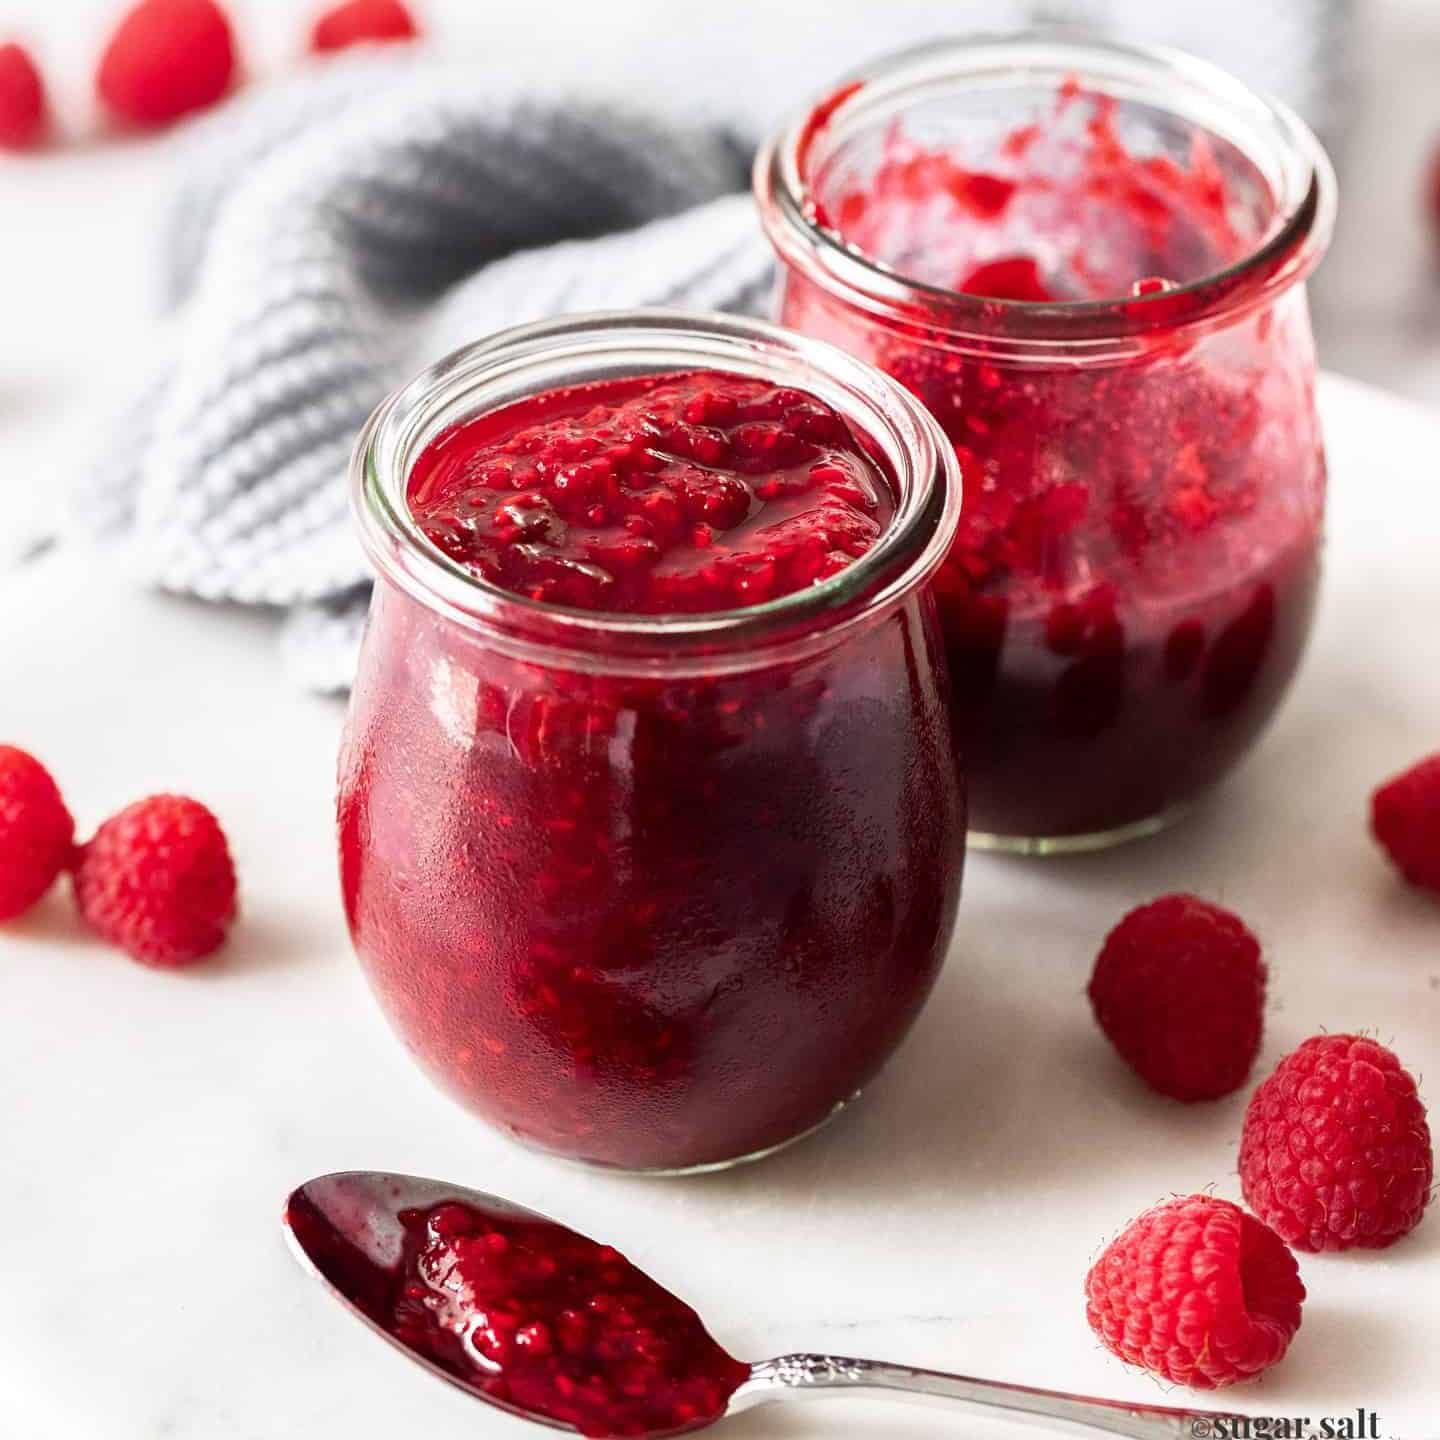 Two glass pots filled with raspberry compote and a spoonful in front.